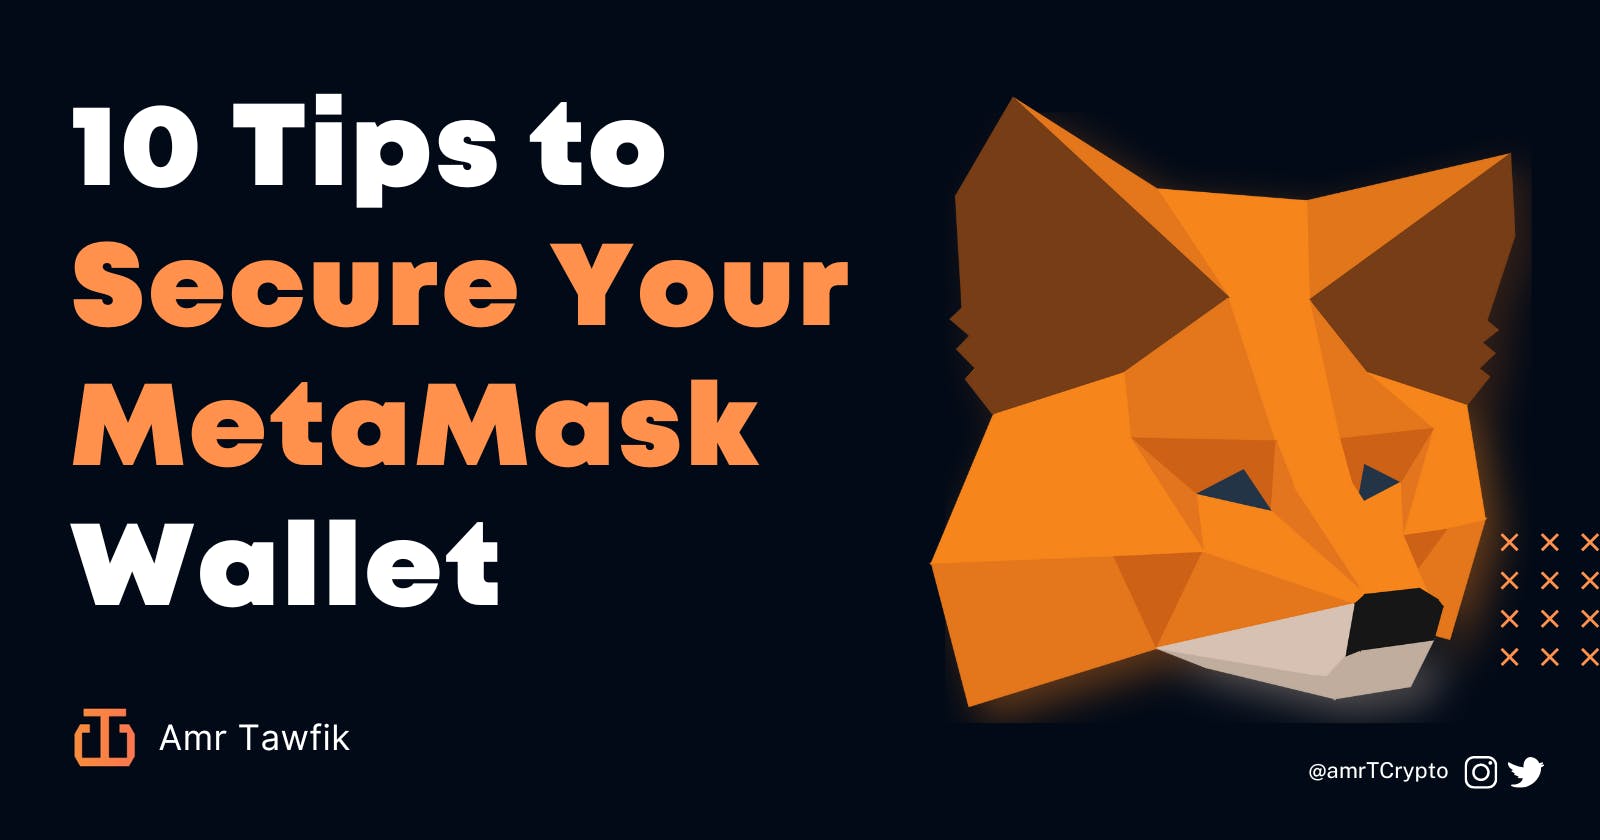 10 Tips to Secure Your MetaMask Wallet